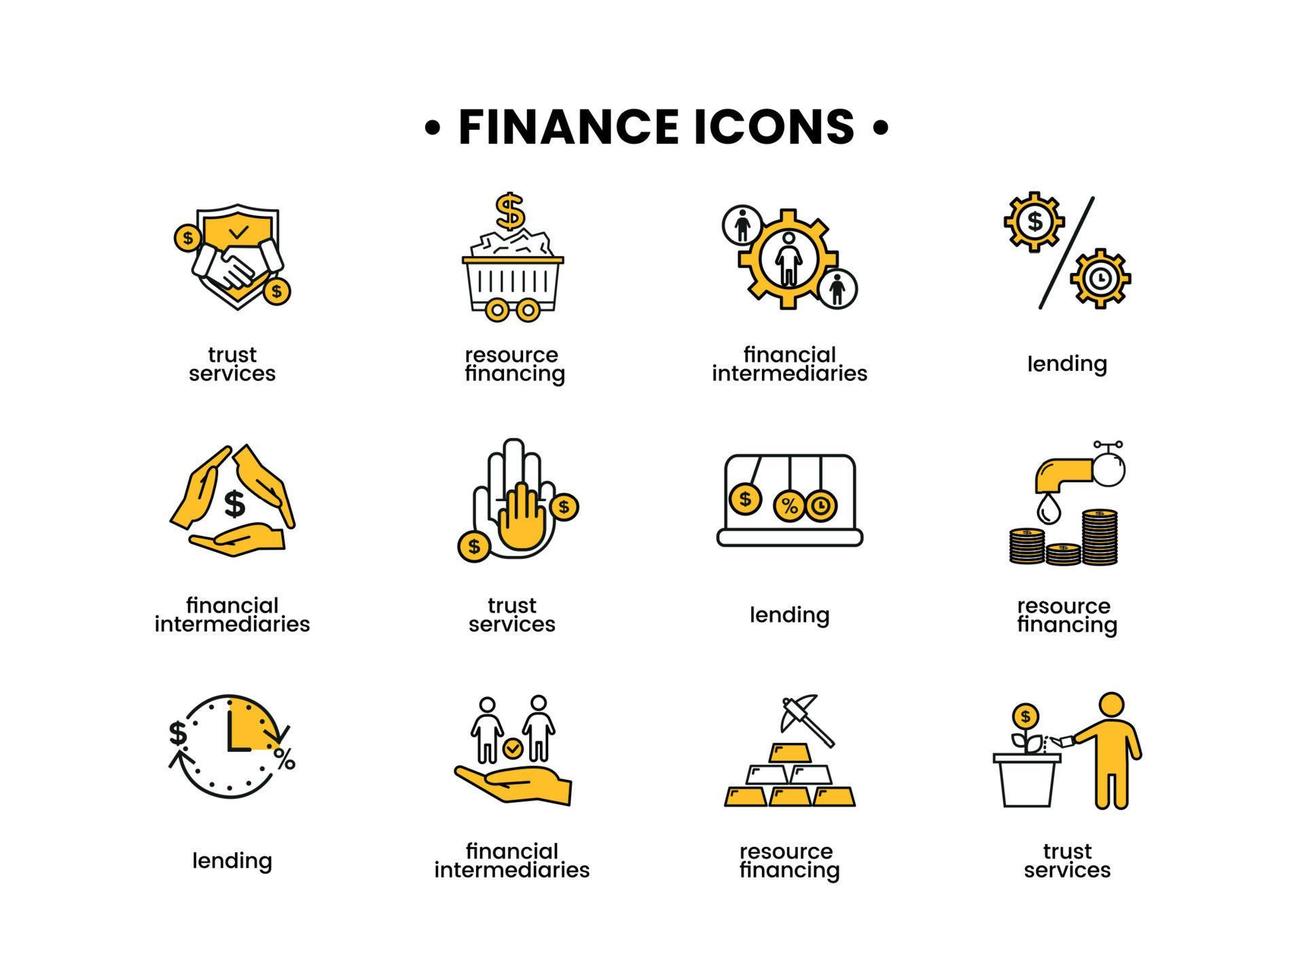 Finance icons set. Vector illustration of financial intermediary icons, resource financing, trust services, lending.